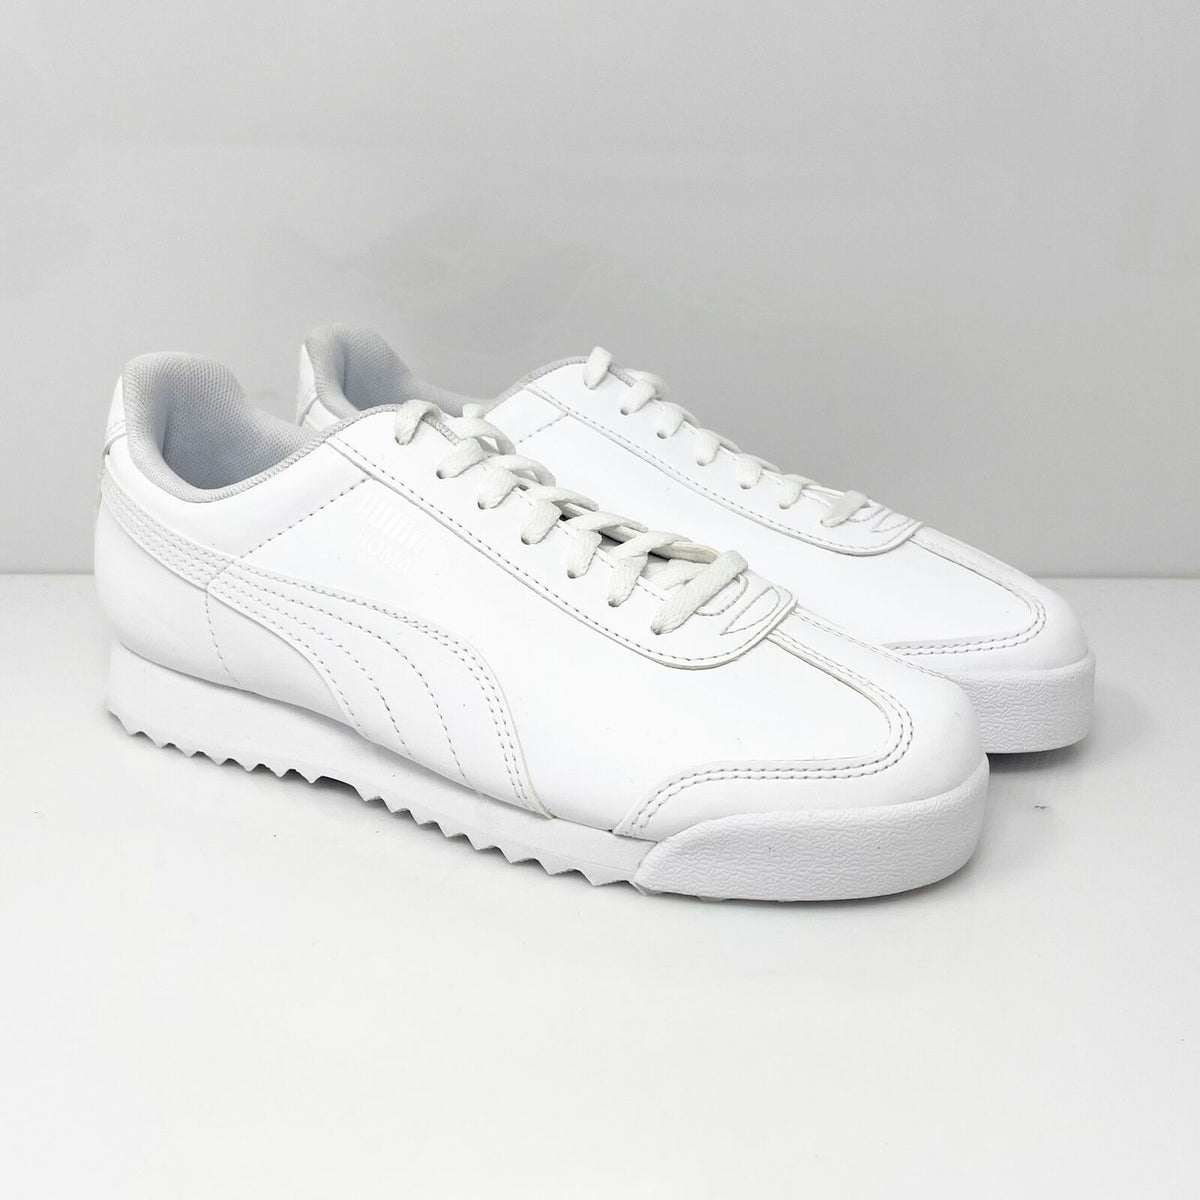 Puma Boys Roma Basic 354259-14 White Casual Shoes Sneakers Size 5C ...